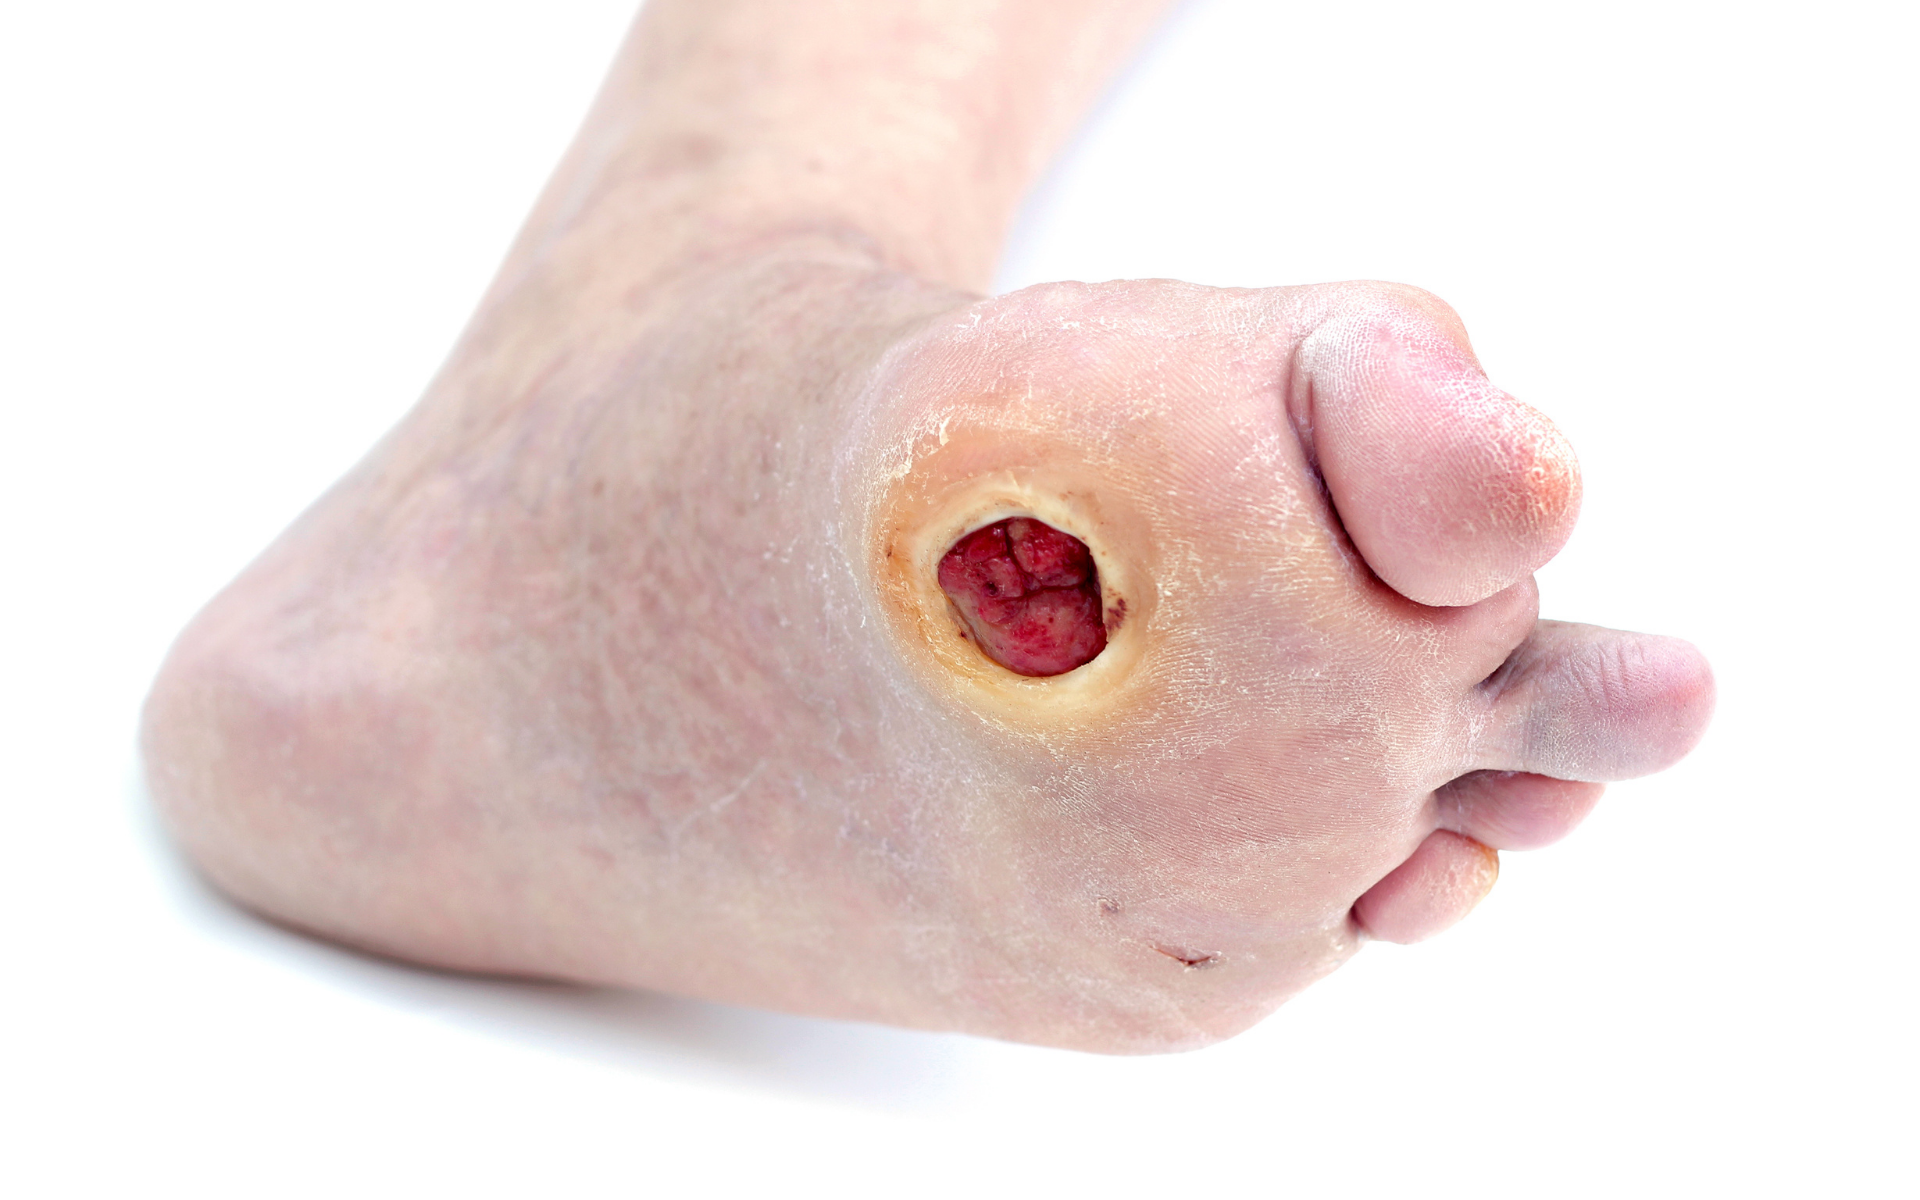 foot ulcer care and treatment by steady gait foot clinic in Scarborough Ontario